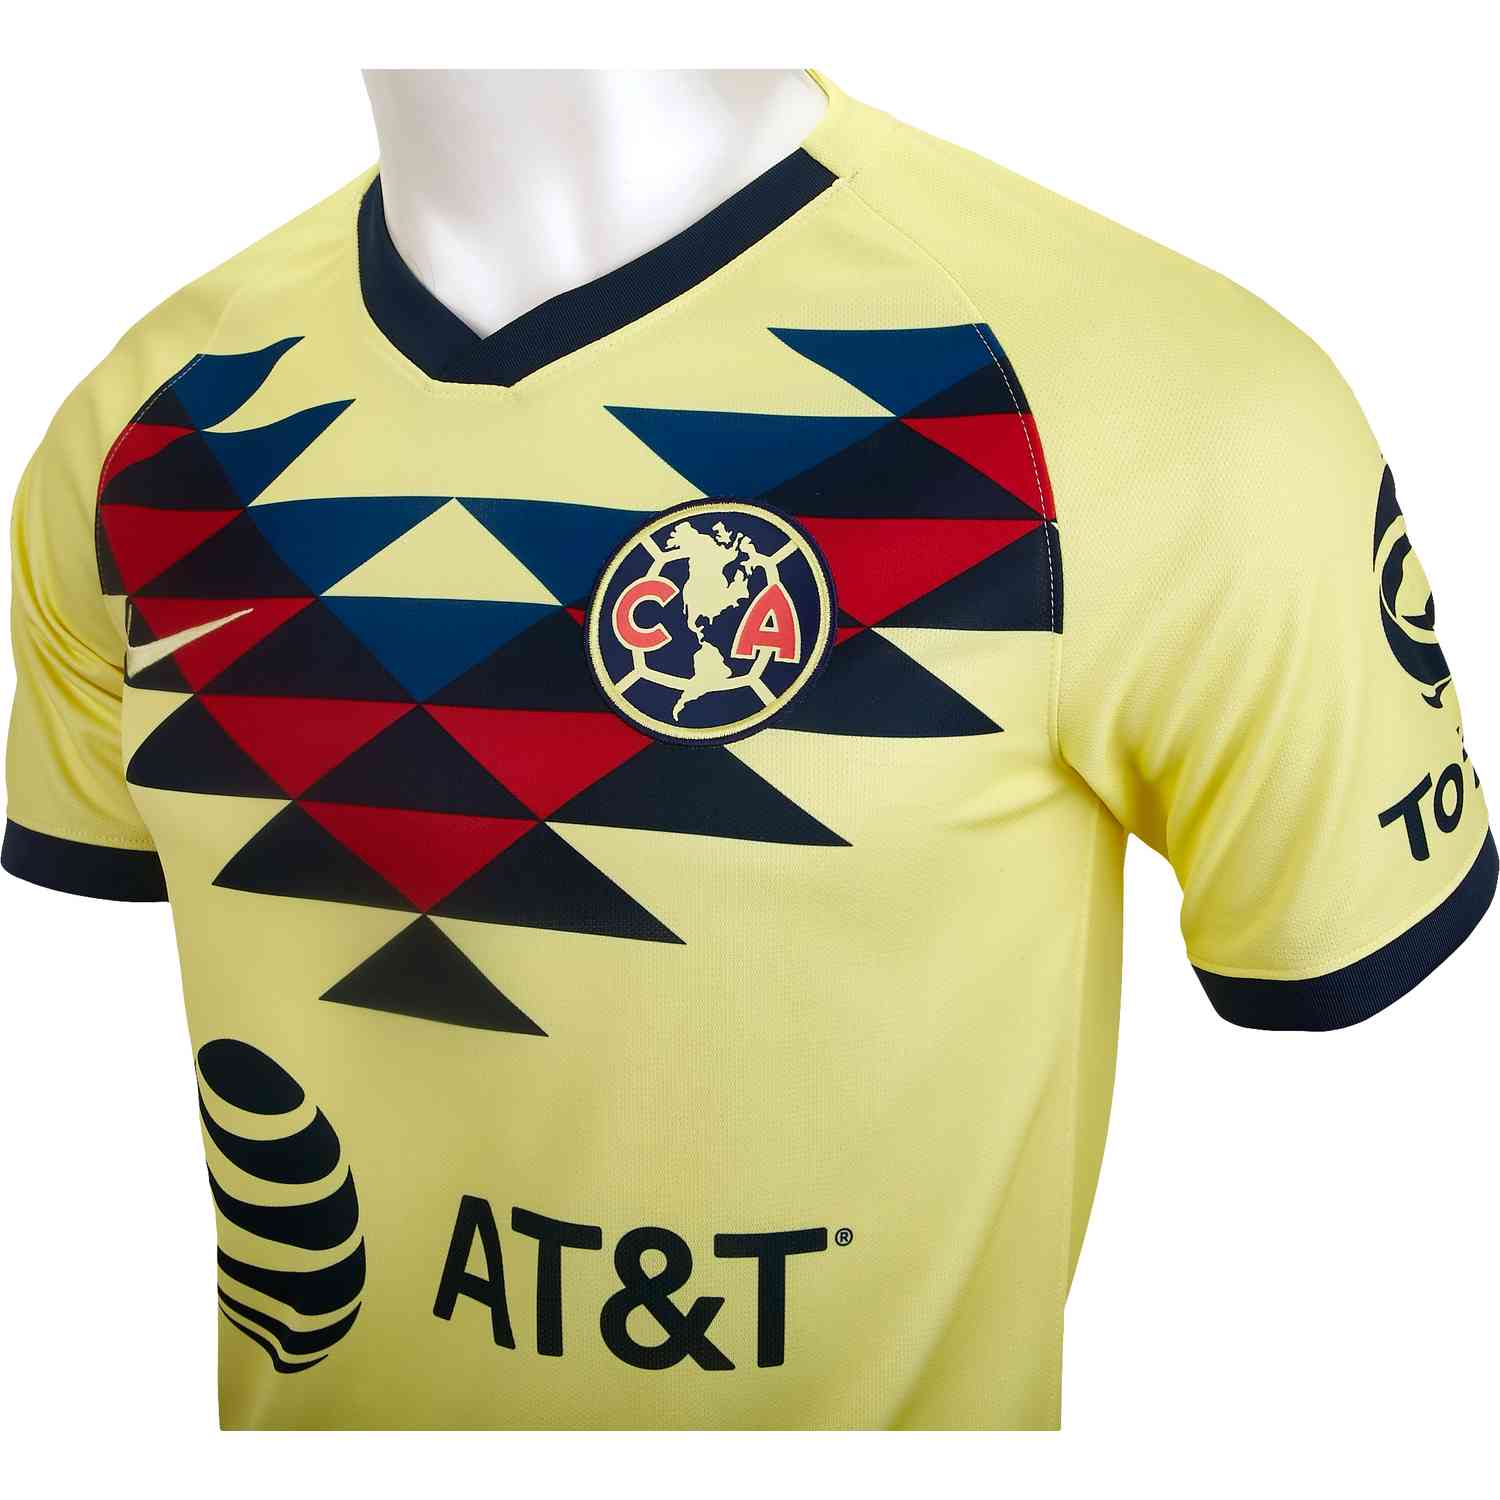 Club America 2019/20 Home Jersey NEW Price Best Fashion Quality 